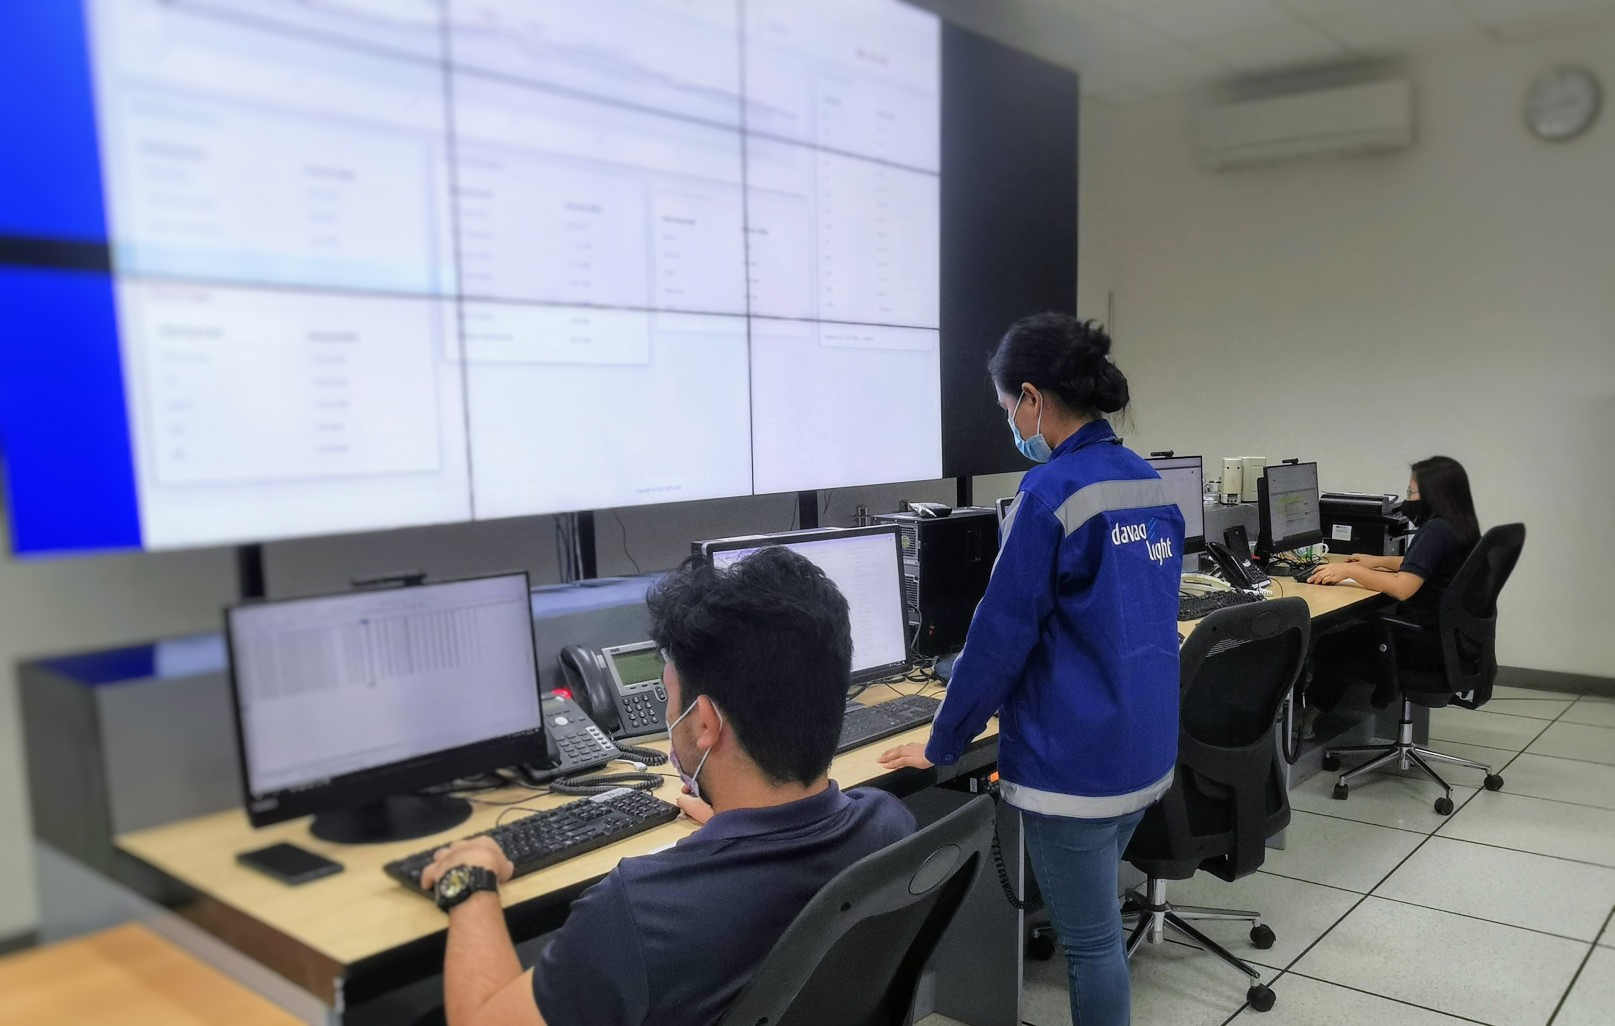 Davao Light strengthens its control and data system from cyber attacks